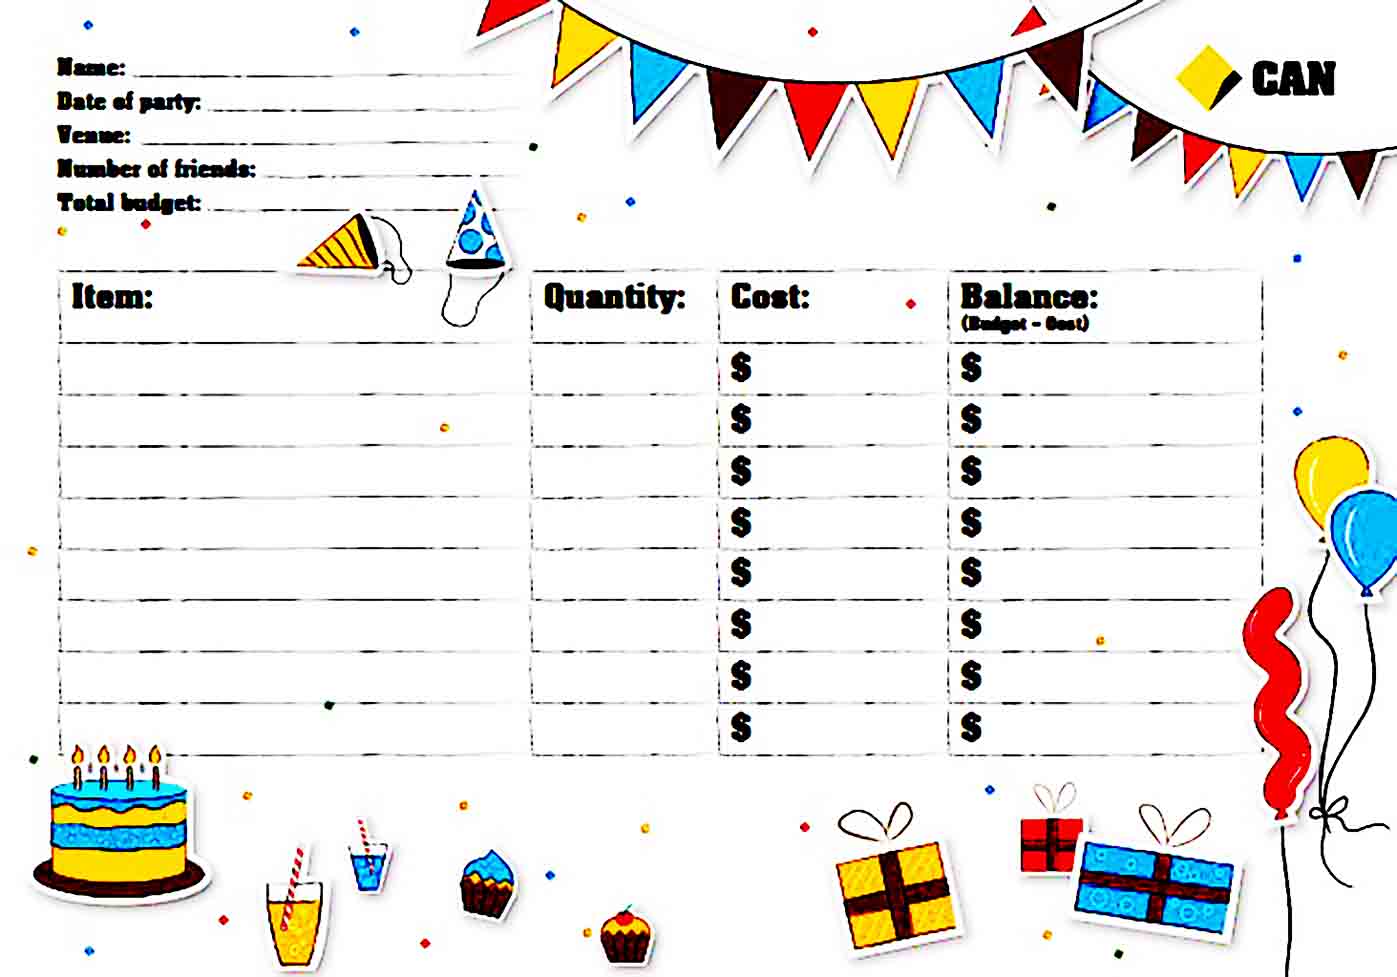 Party Planner Budget Template